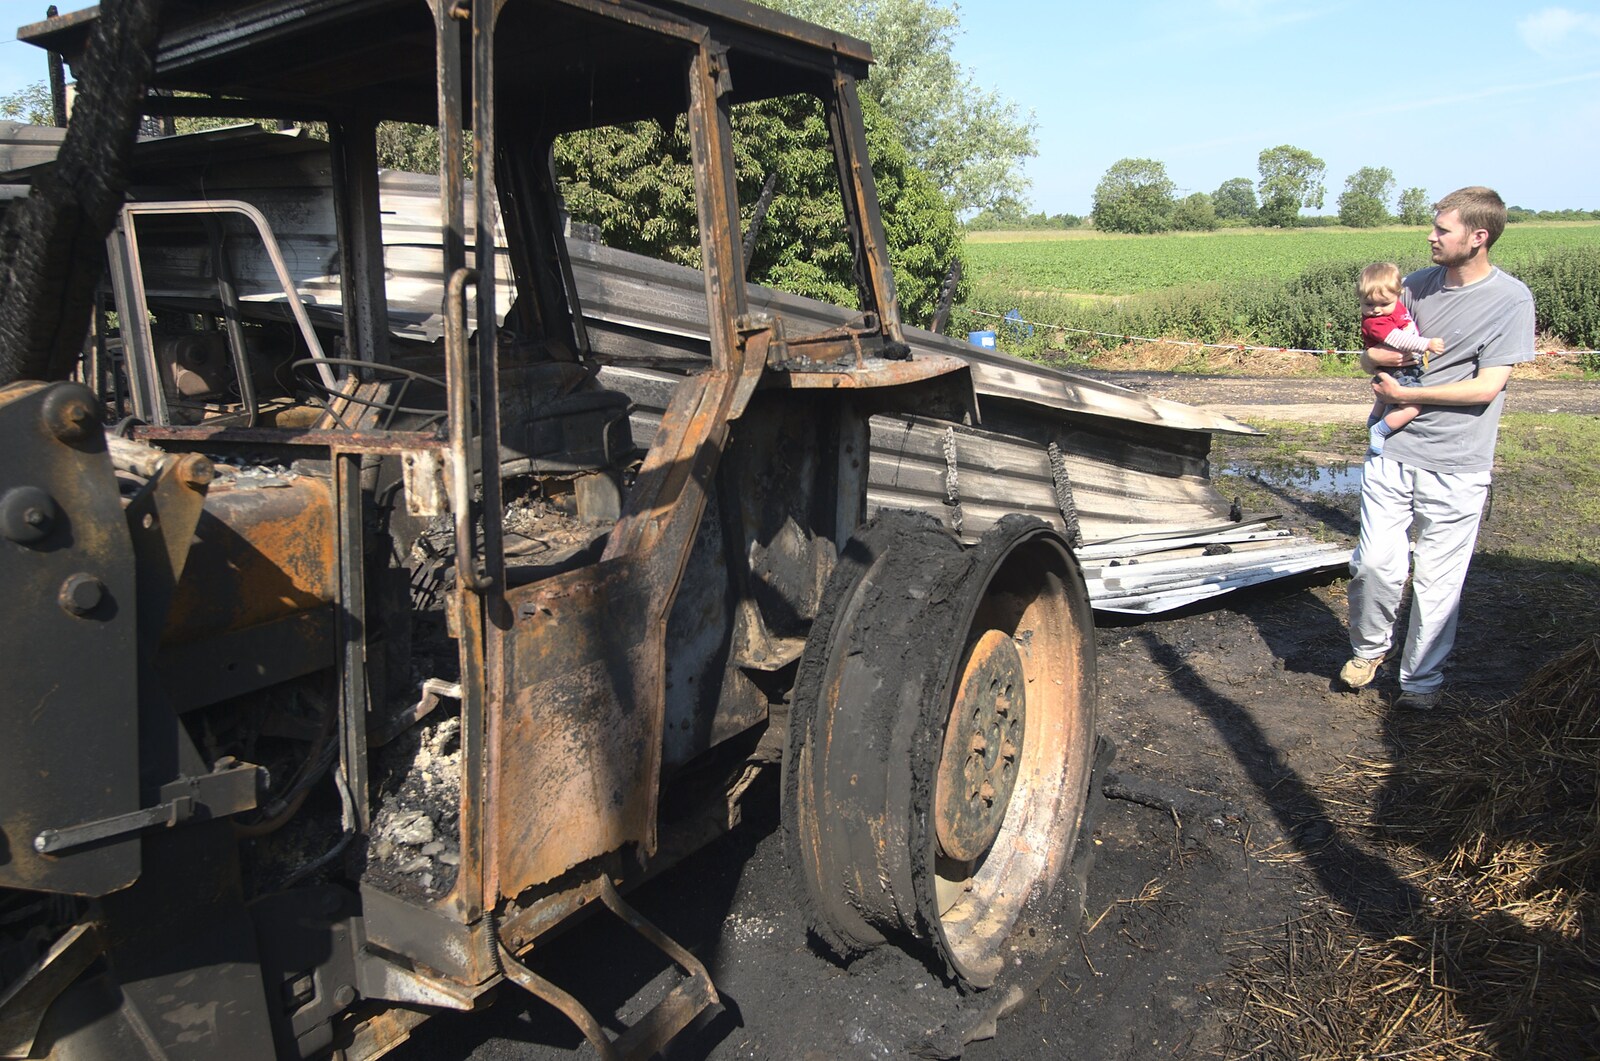 Fred gets a look at the burned-out tractor from A Fire at Valley Farm, Thrandeston, Suffolk - 24th June 2009